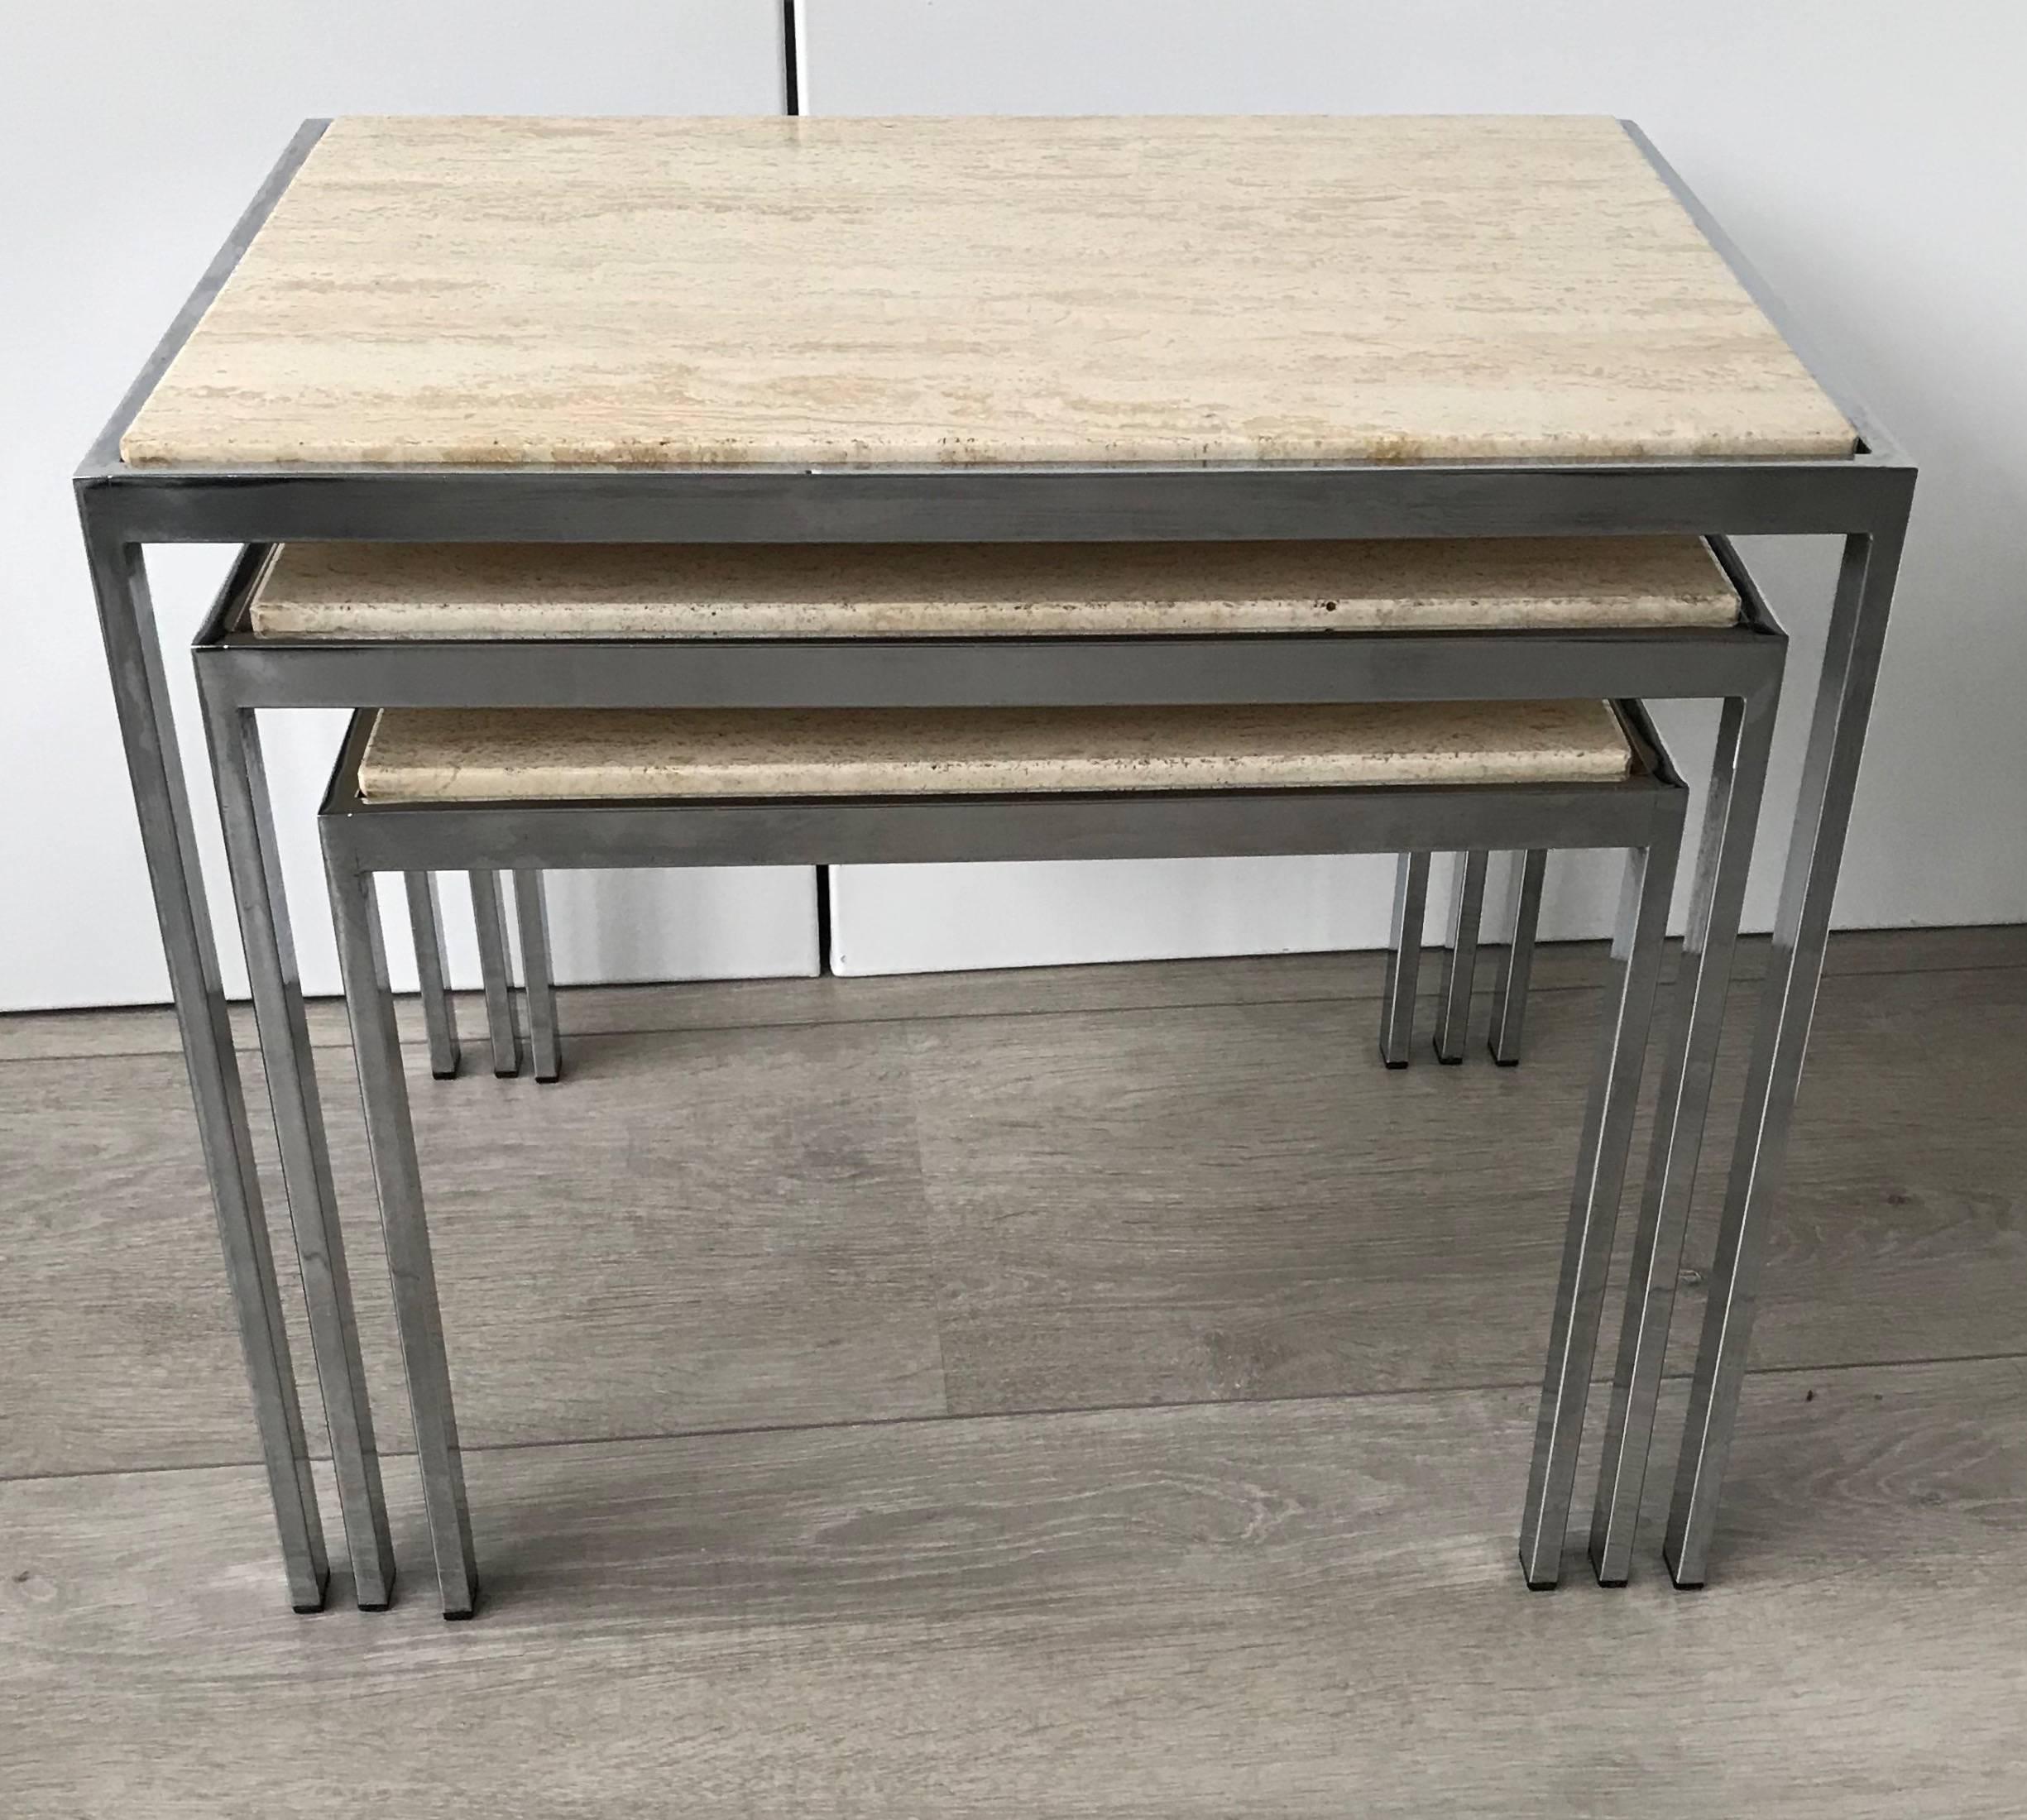 Good quality and great Italian design nest of tables with inlaid travertine tops.  

This 1960s multipurpose nest of tables is of beautiful quality and design. The combination of the light color hardstone tops and the straight lined chrome frames